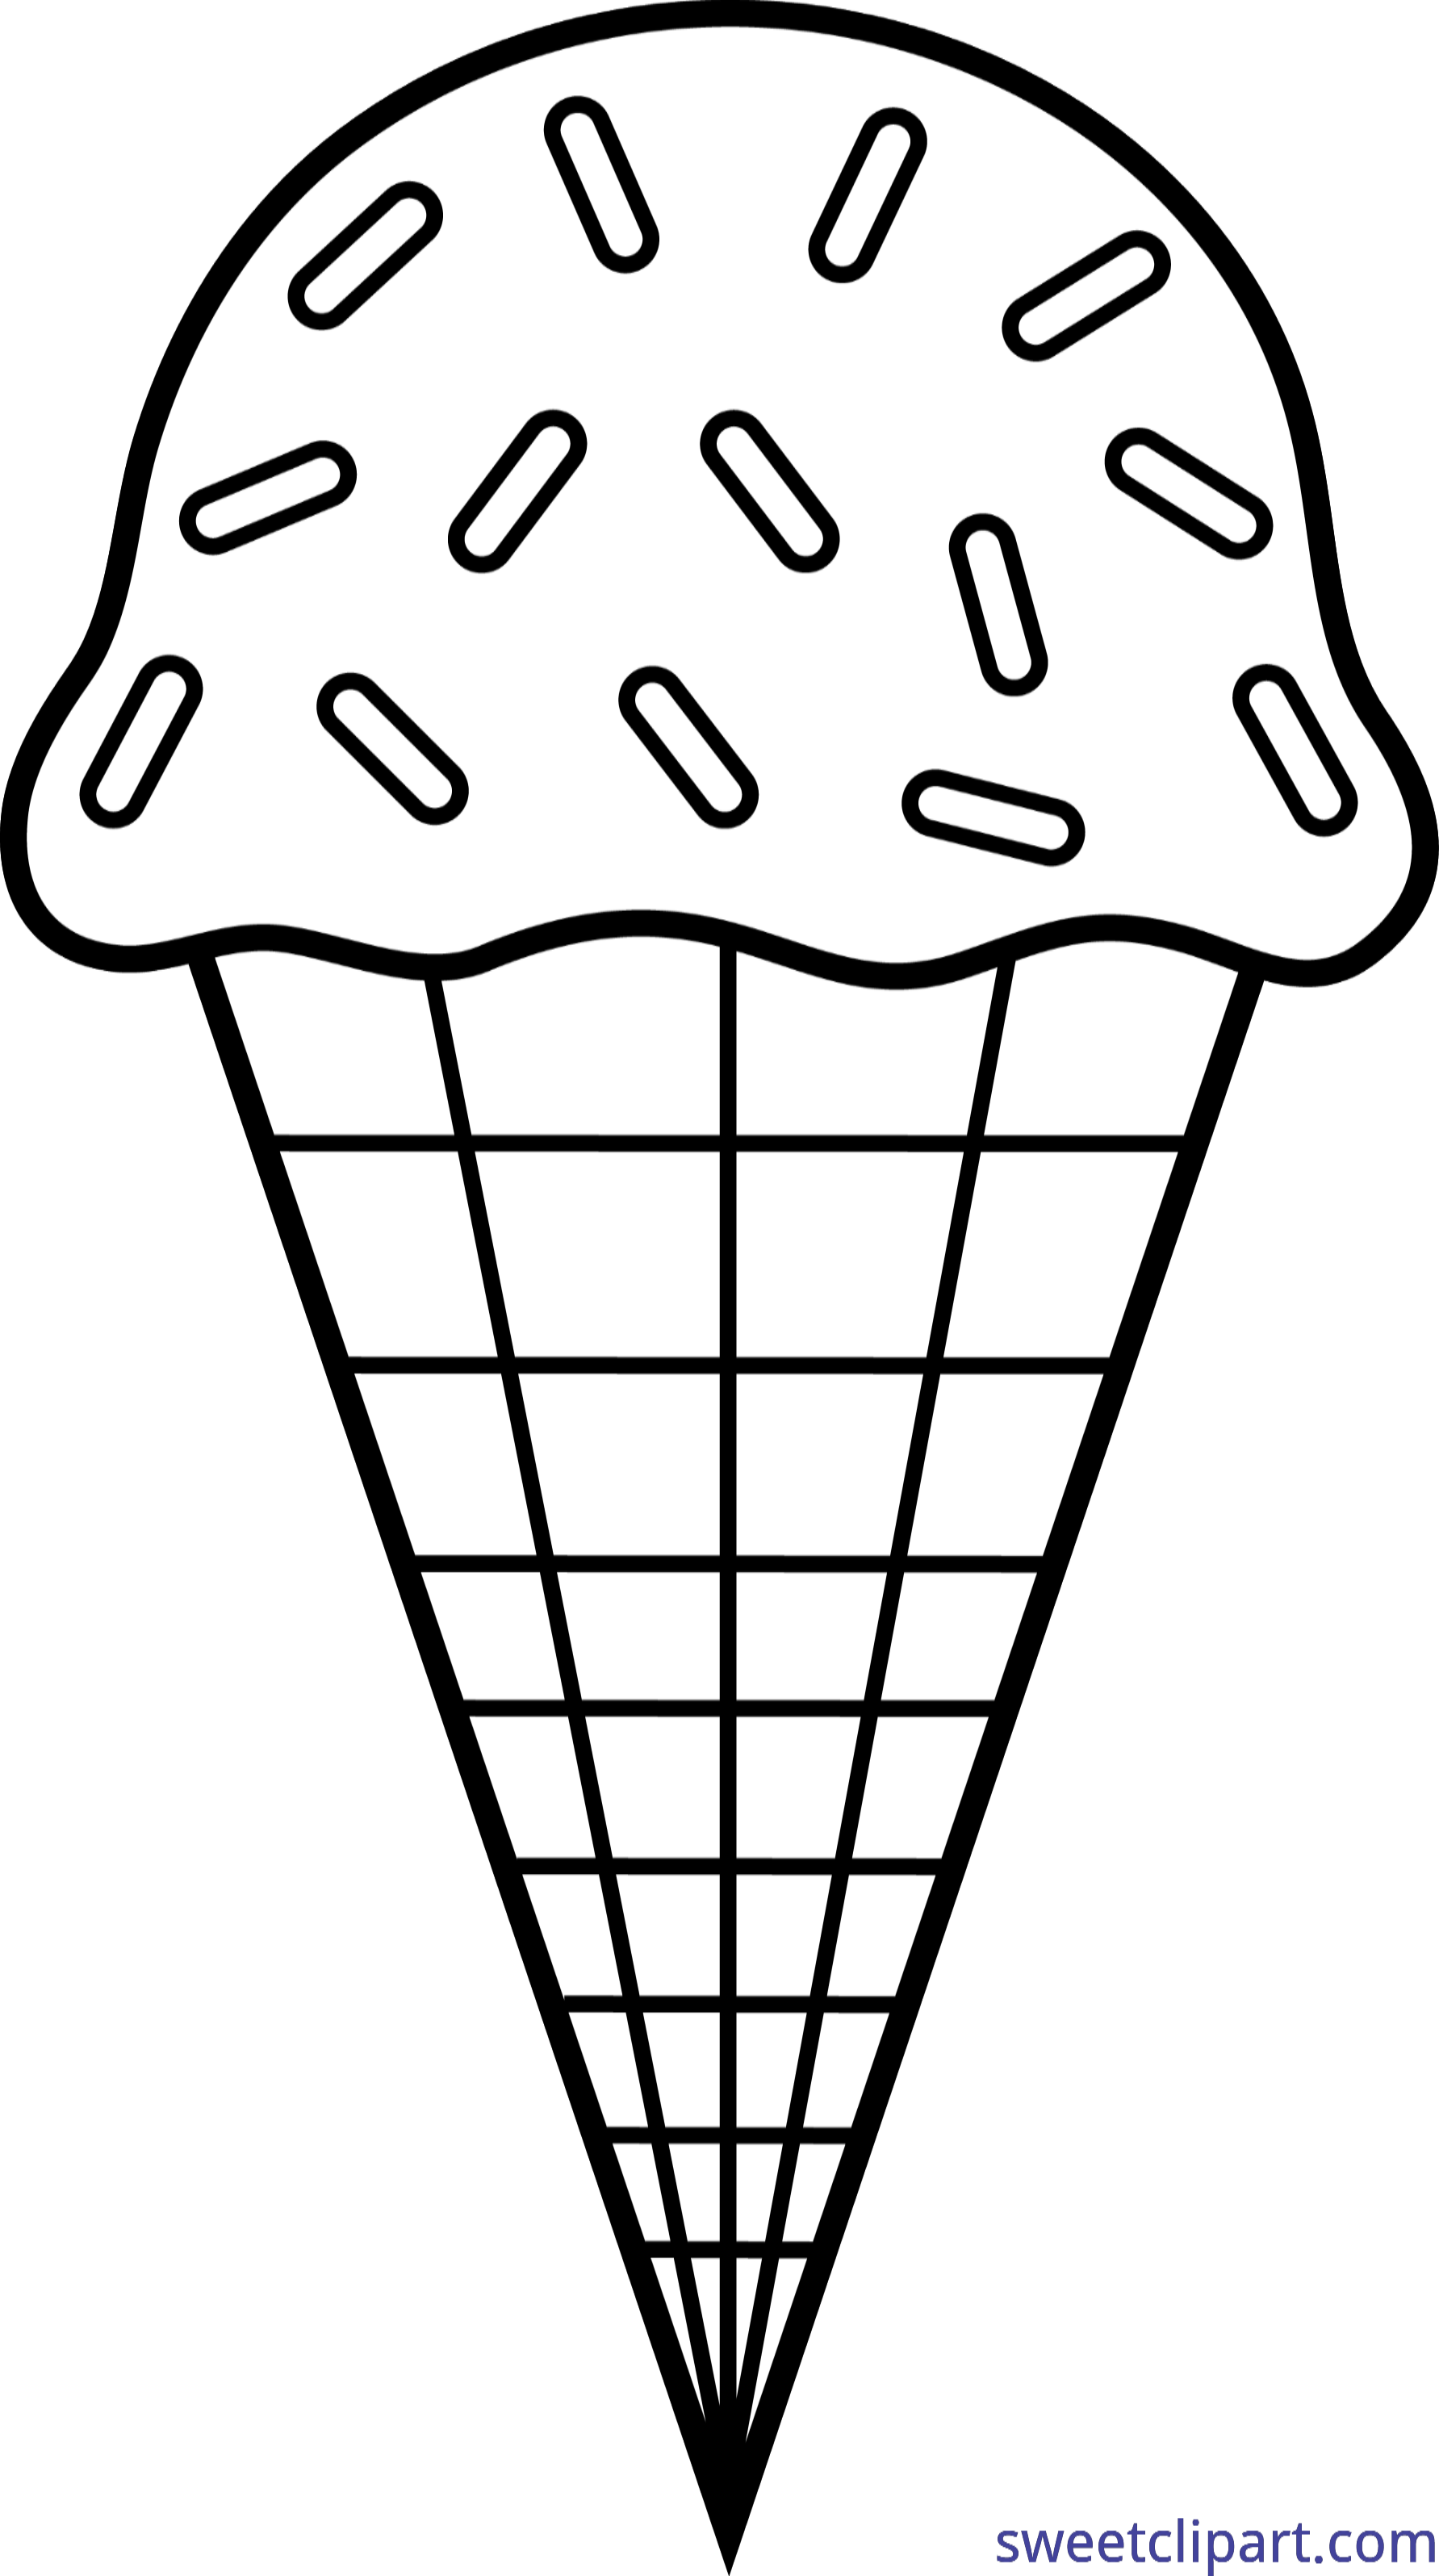 Ice cream sprinkles lineart. Cone clipart cute